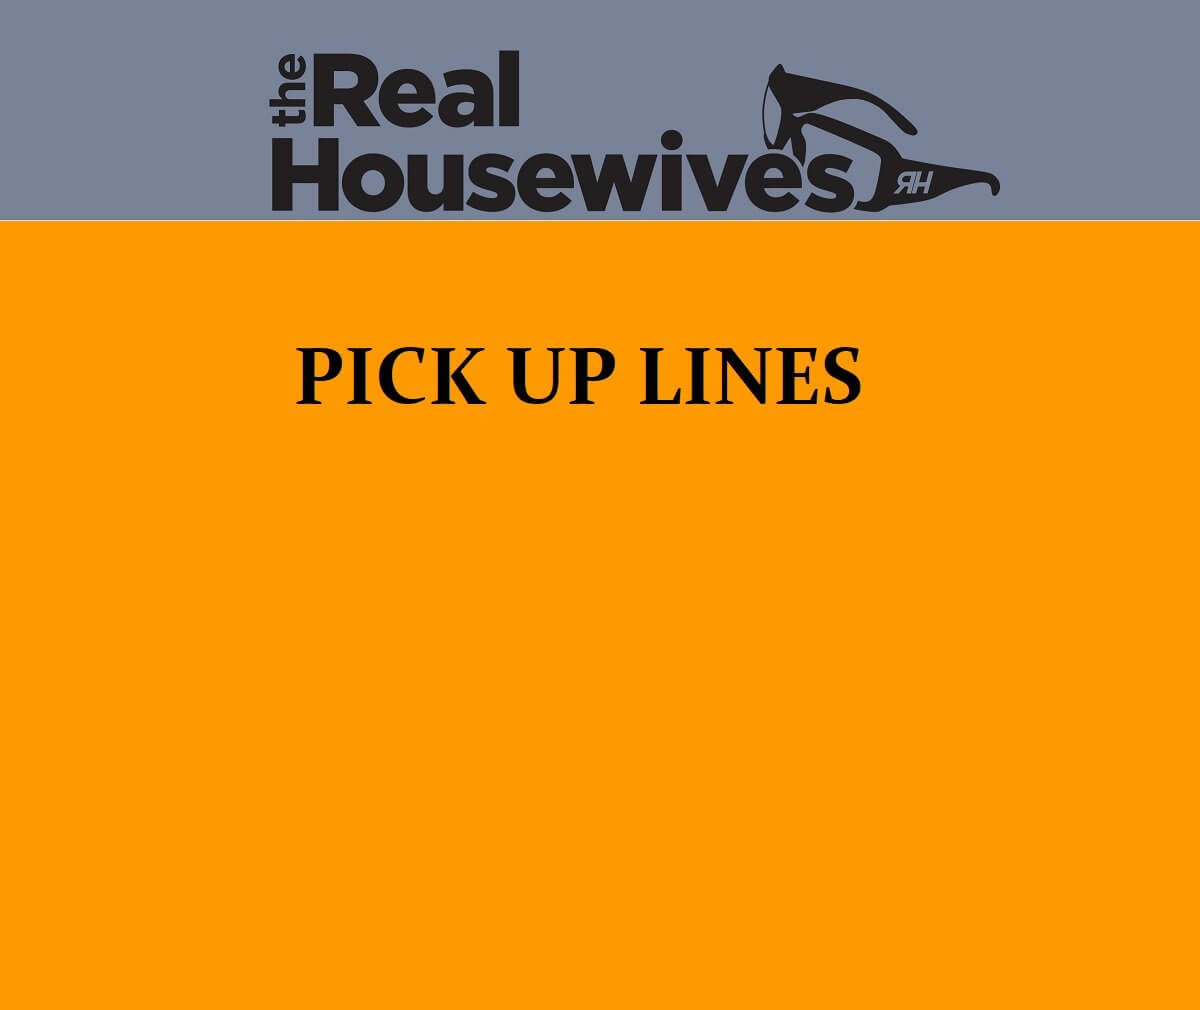 Pick Up Lines Inspired by Real Housewives